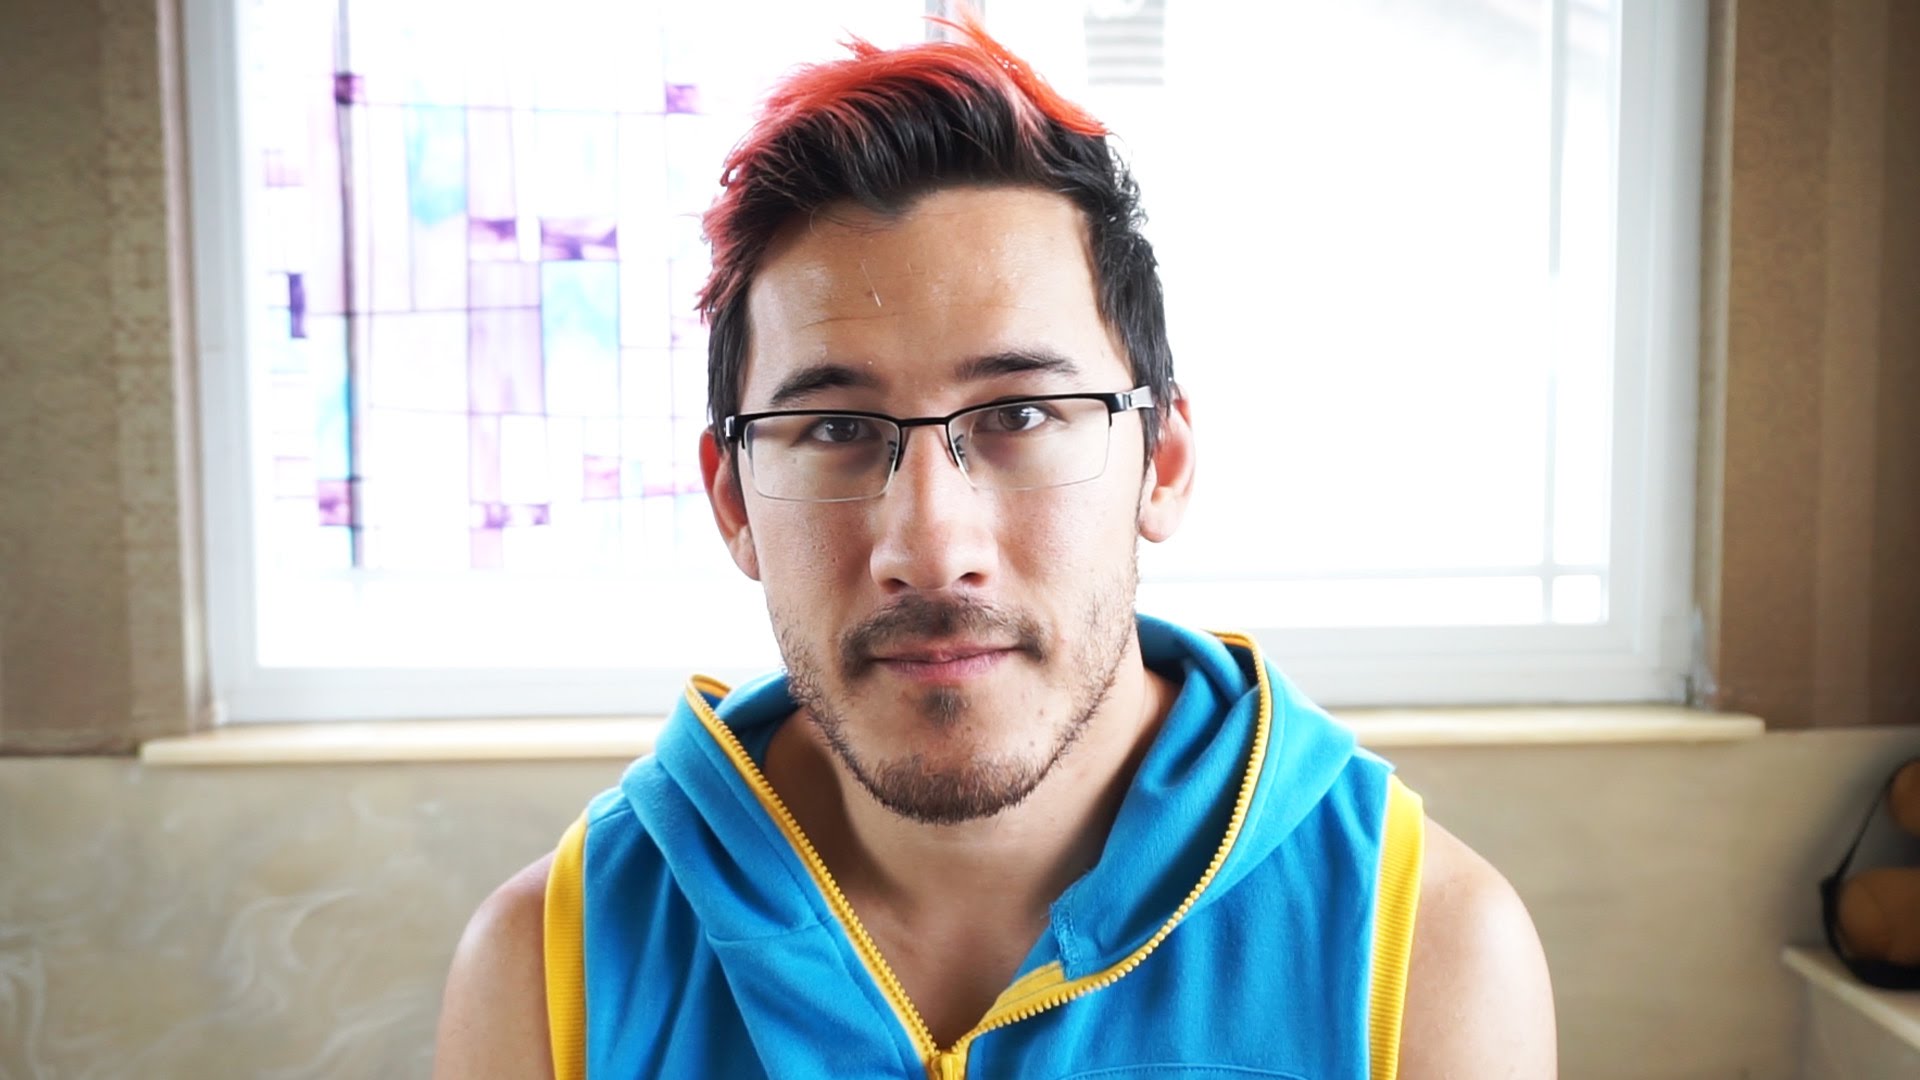 Forbes Names Markiplier The Top Influencer In Gaming